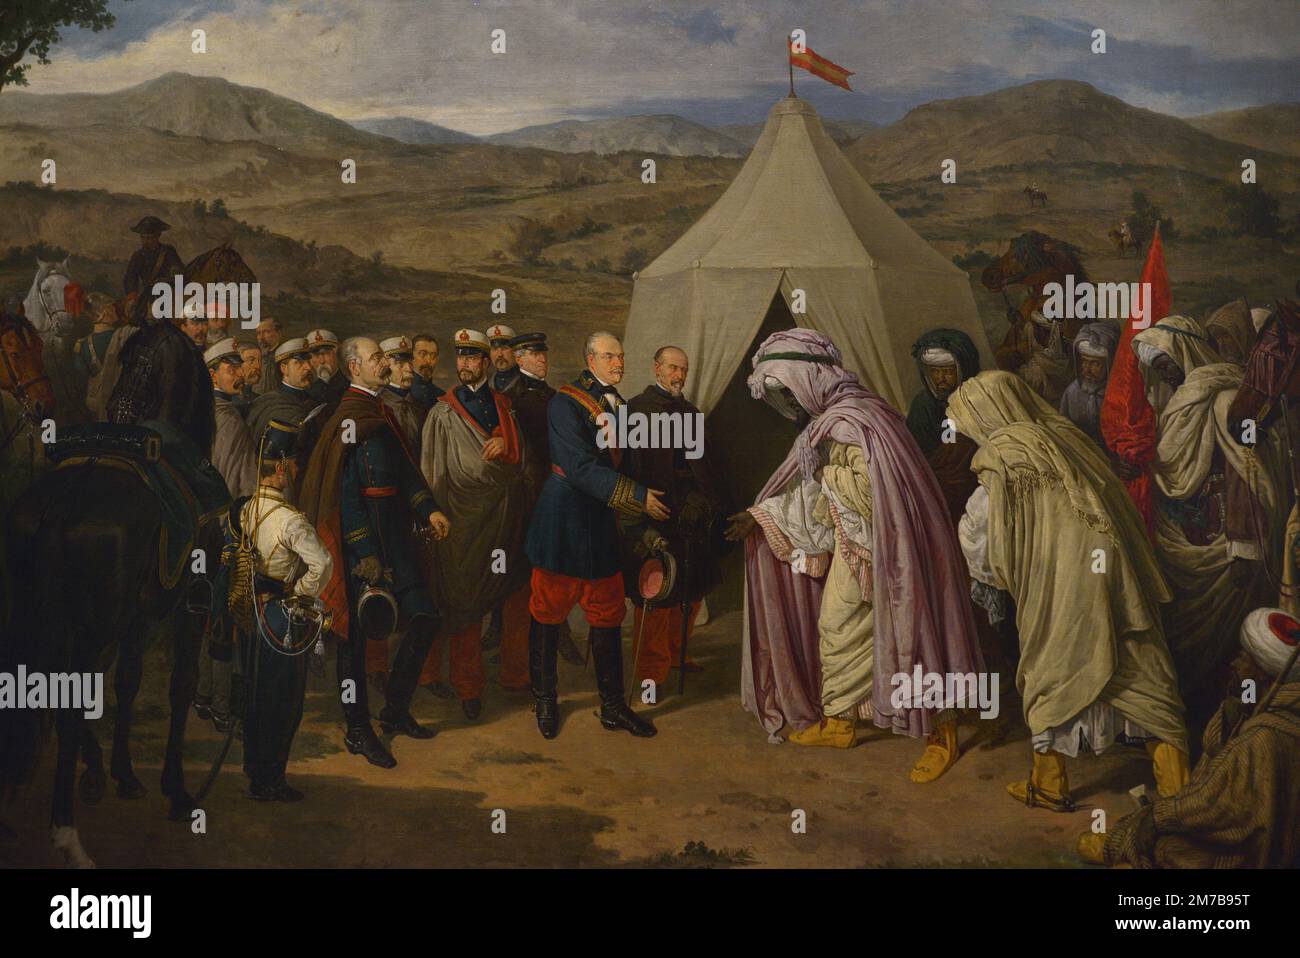 Moroccan Peace (Treaty of Wad Ras). Peace treaty signed in Tetouan between Spain and Morocco on 26 April 1860. It concluded the Hispano-Moroccan War after the successive defeats suffered by Morocco. Oil on canvas by Jose Chaves (1839-1903), 1880. Copy of an original by Joaquin Dominguez Becquer. Detail. Army Museum. Toledo, Spain. Author: José Chaves Ortiz (1839-1903). Spanish painter. Stock Photo